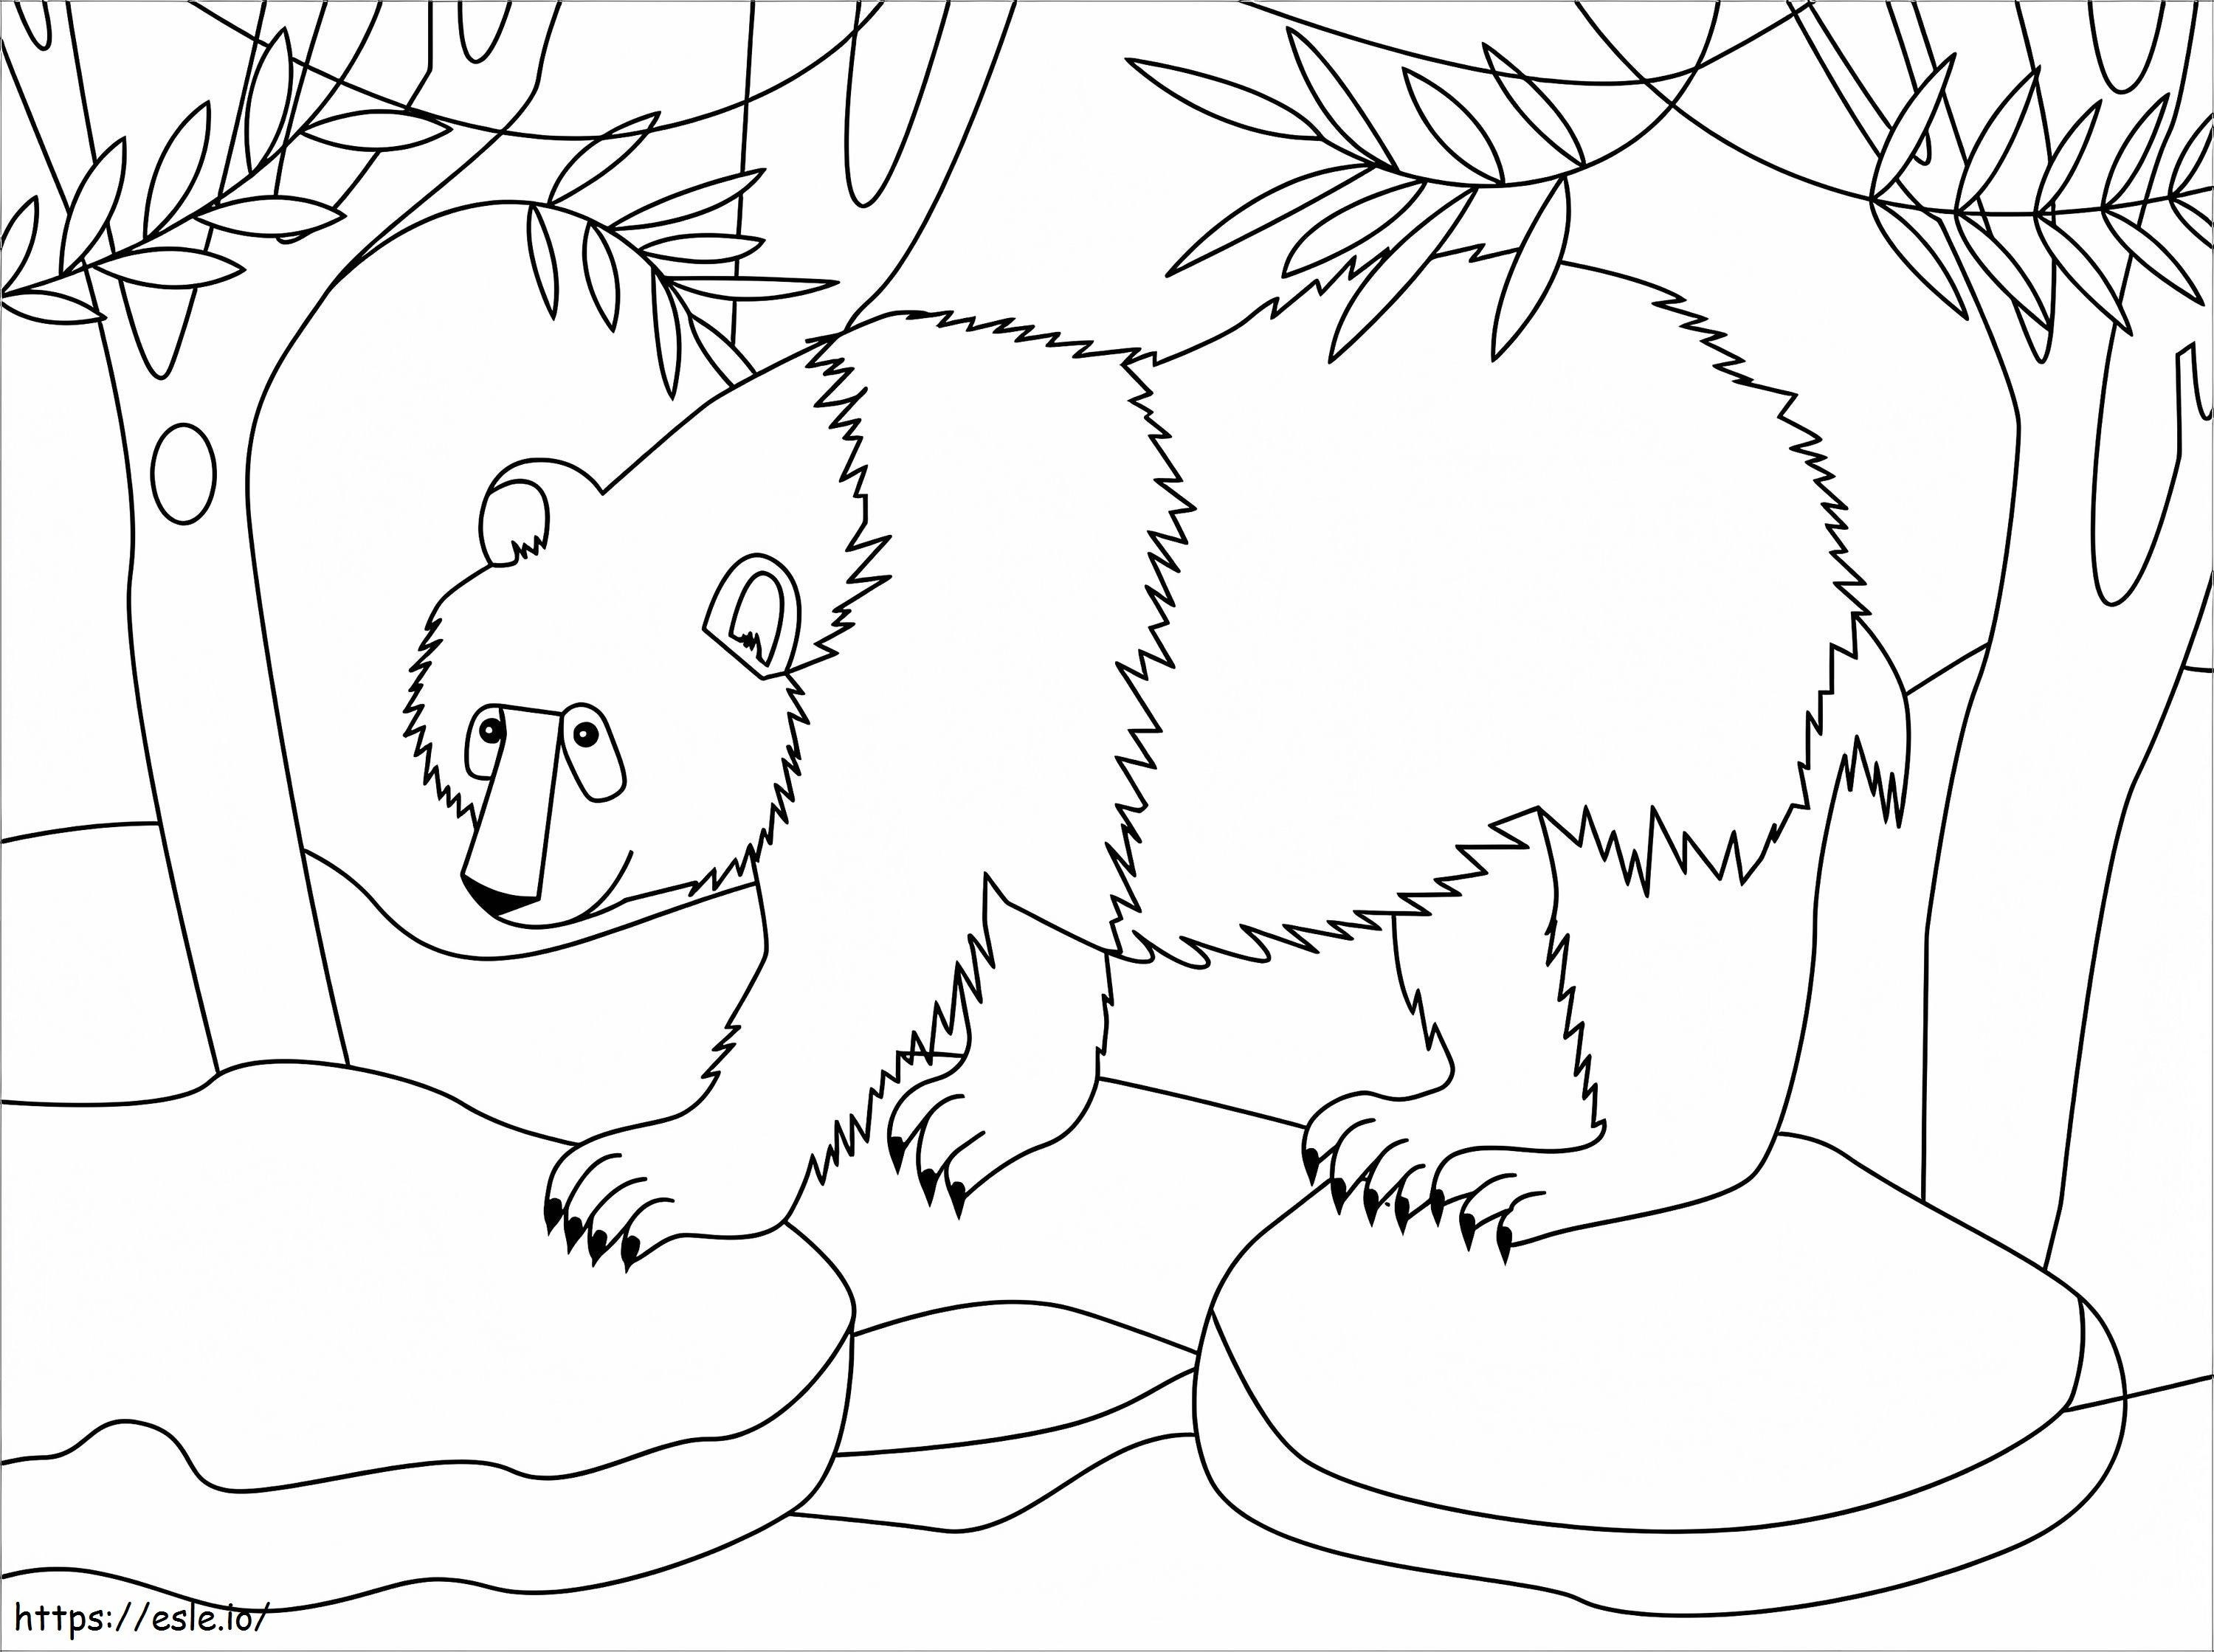 One Panda coloring page